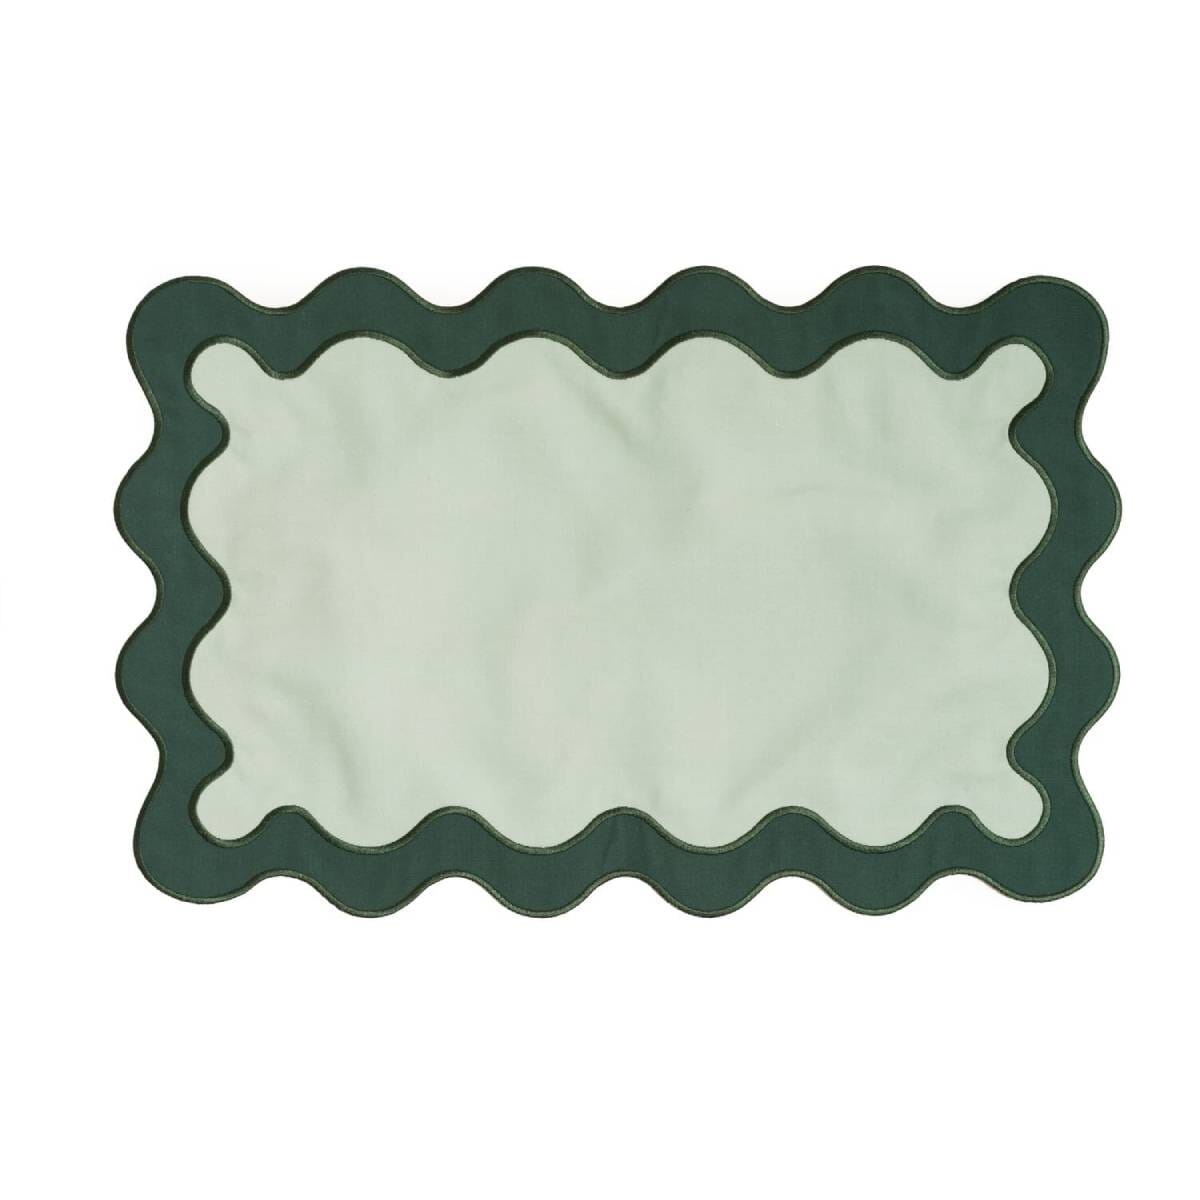 Studio image of riviera green placemat